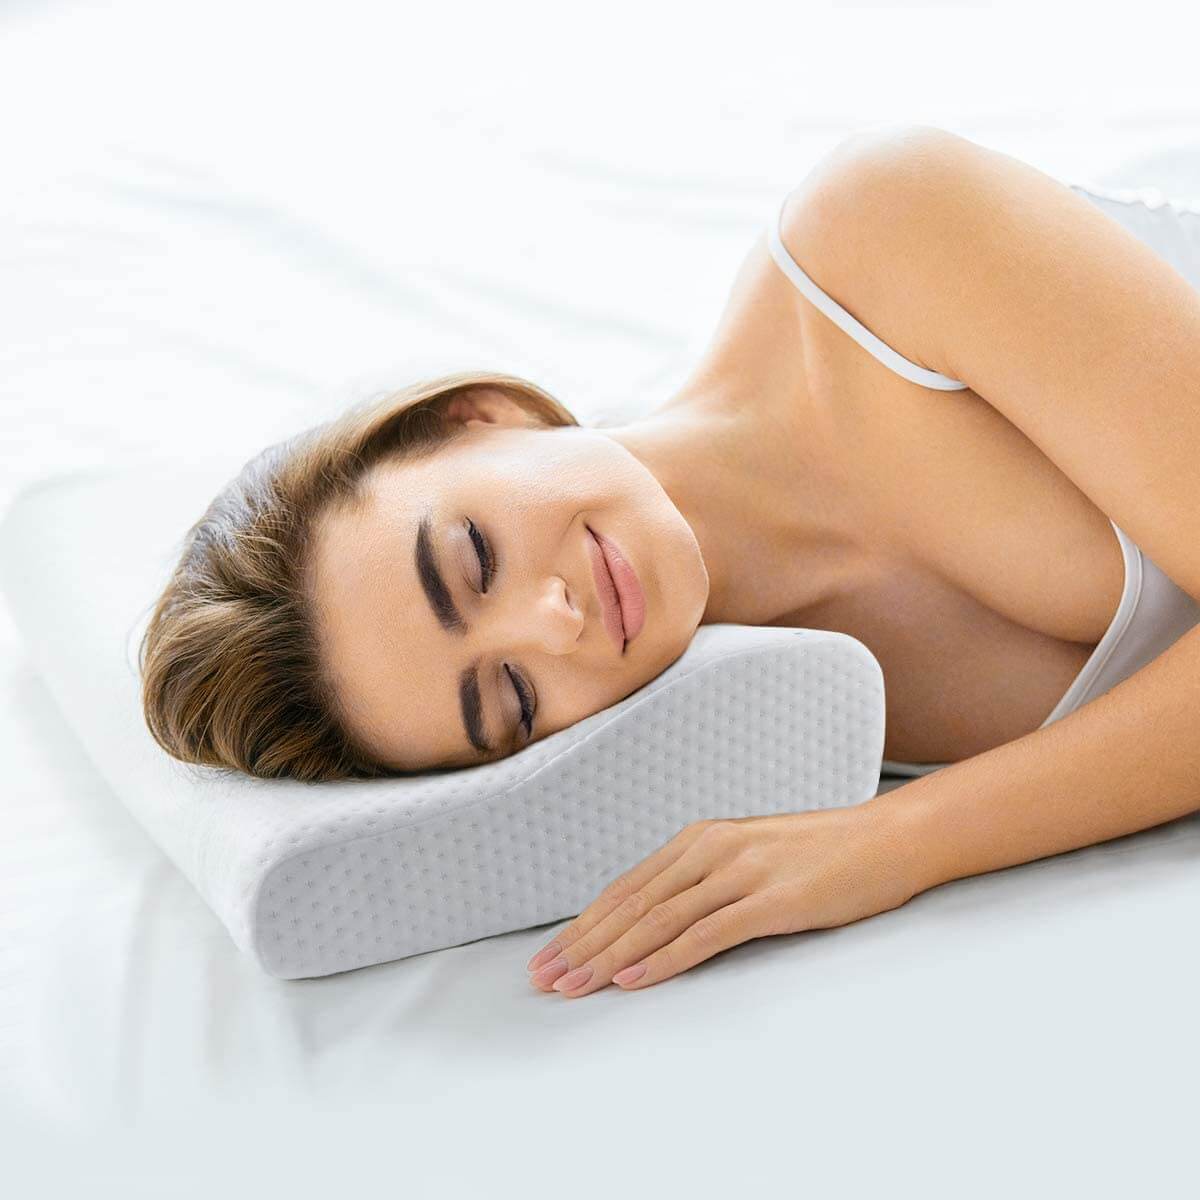 Clevive™ Cervical Stenosis Pillow